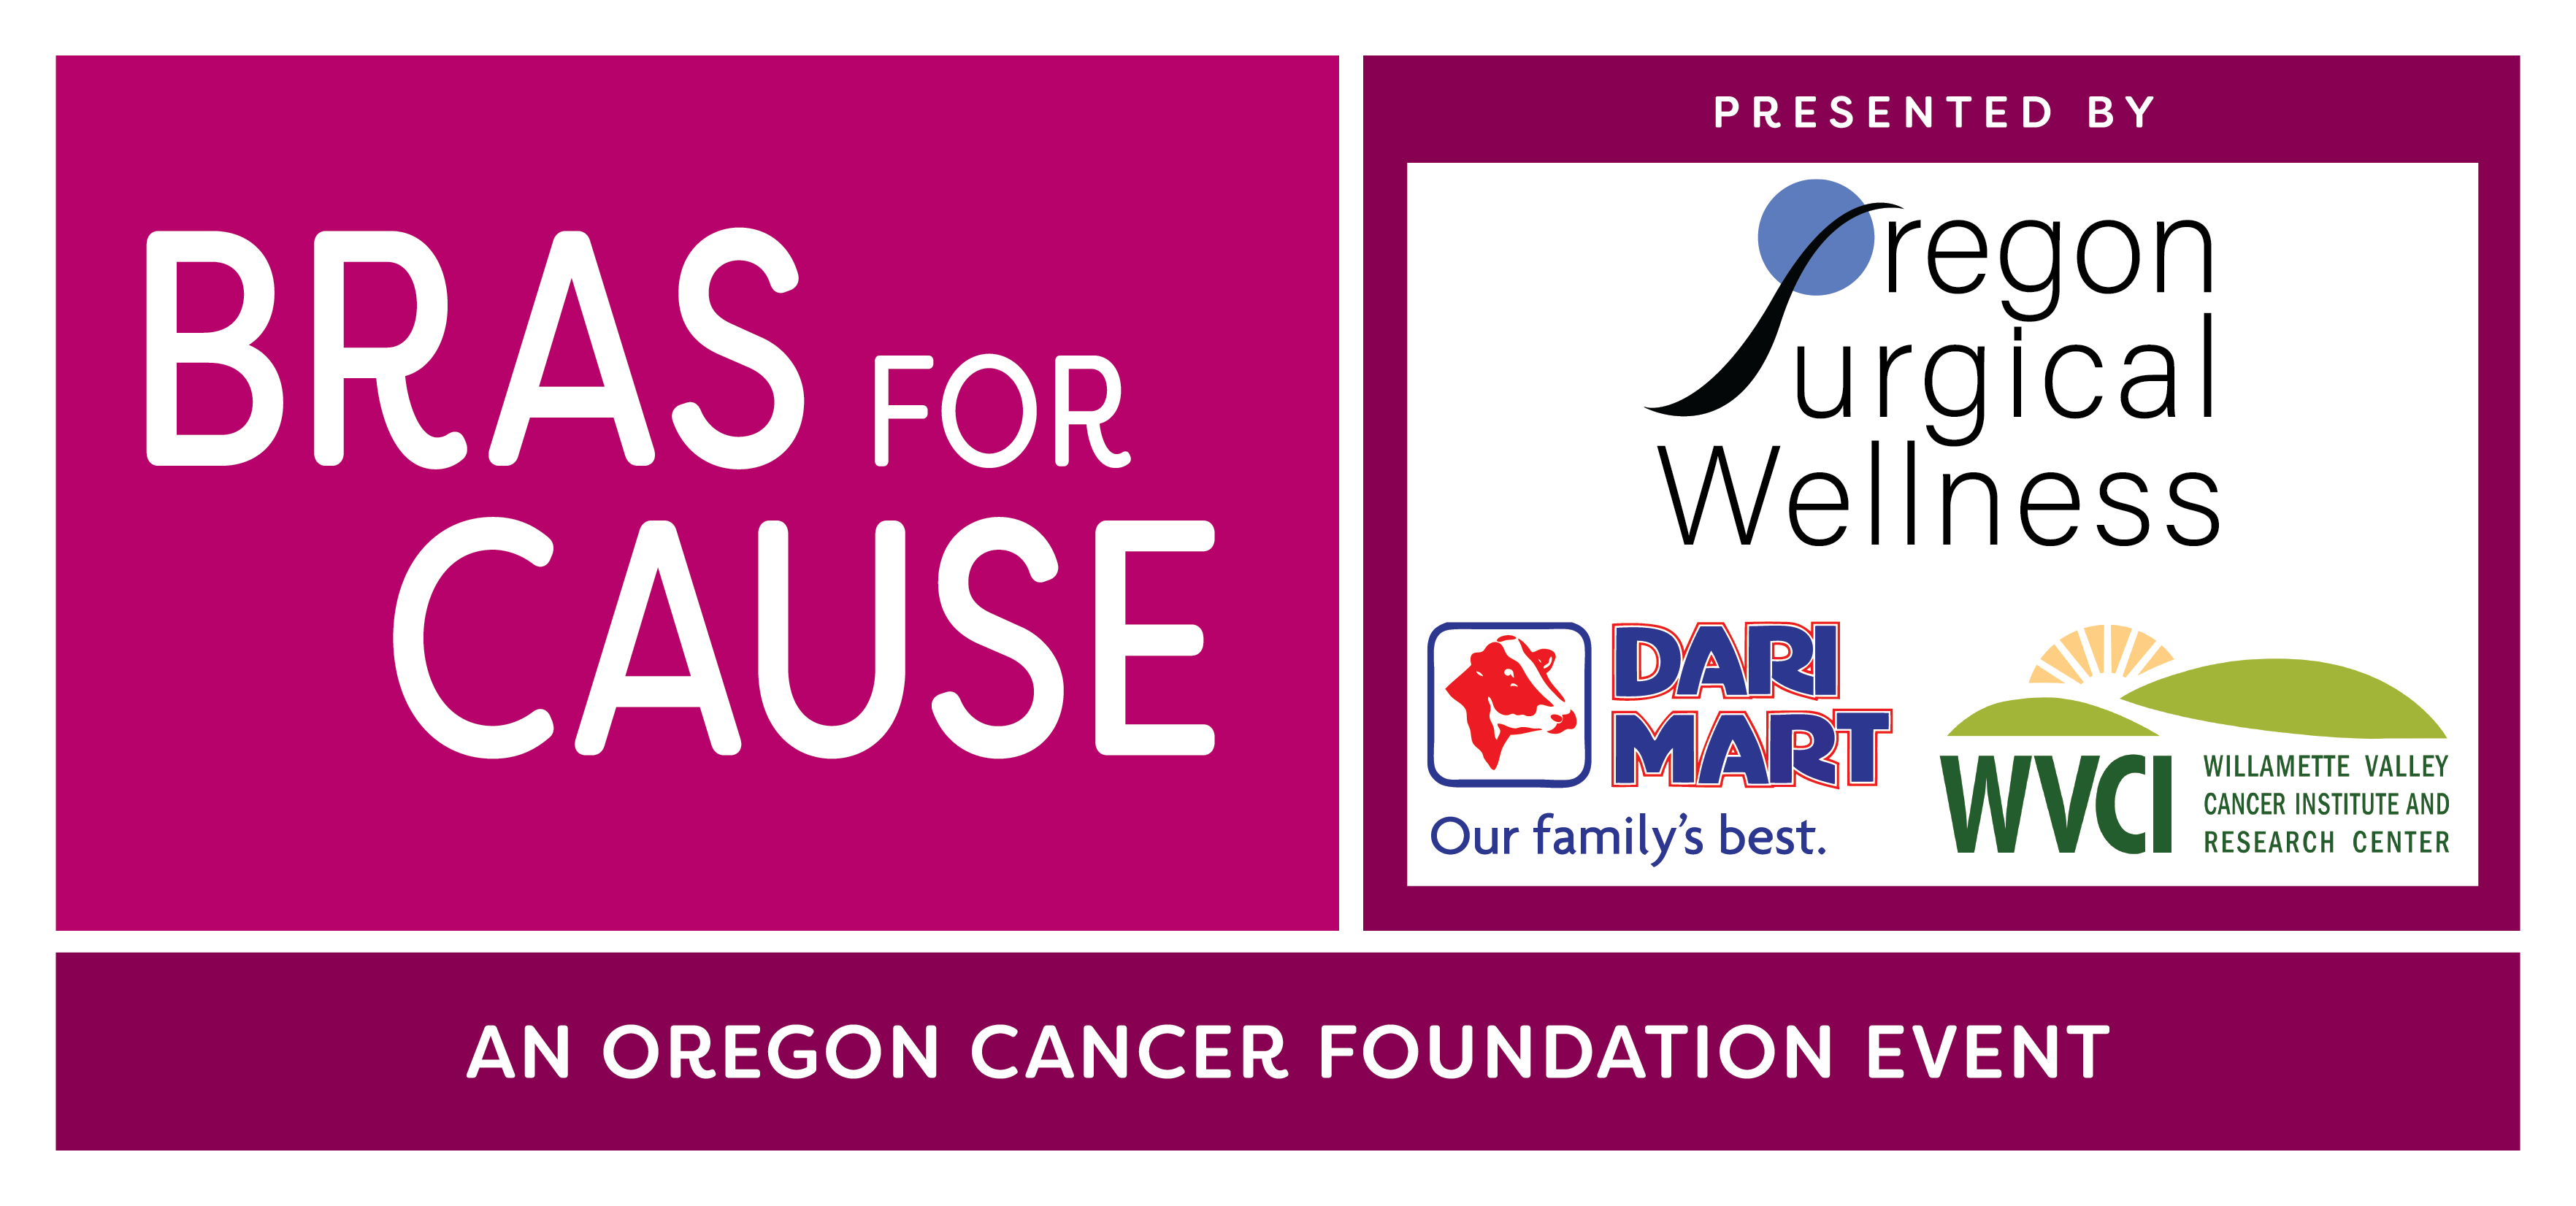 Bras For Cause - An Oregon Cancer Foundation Event